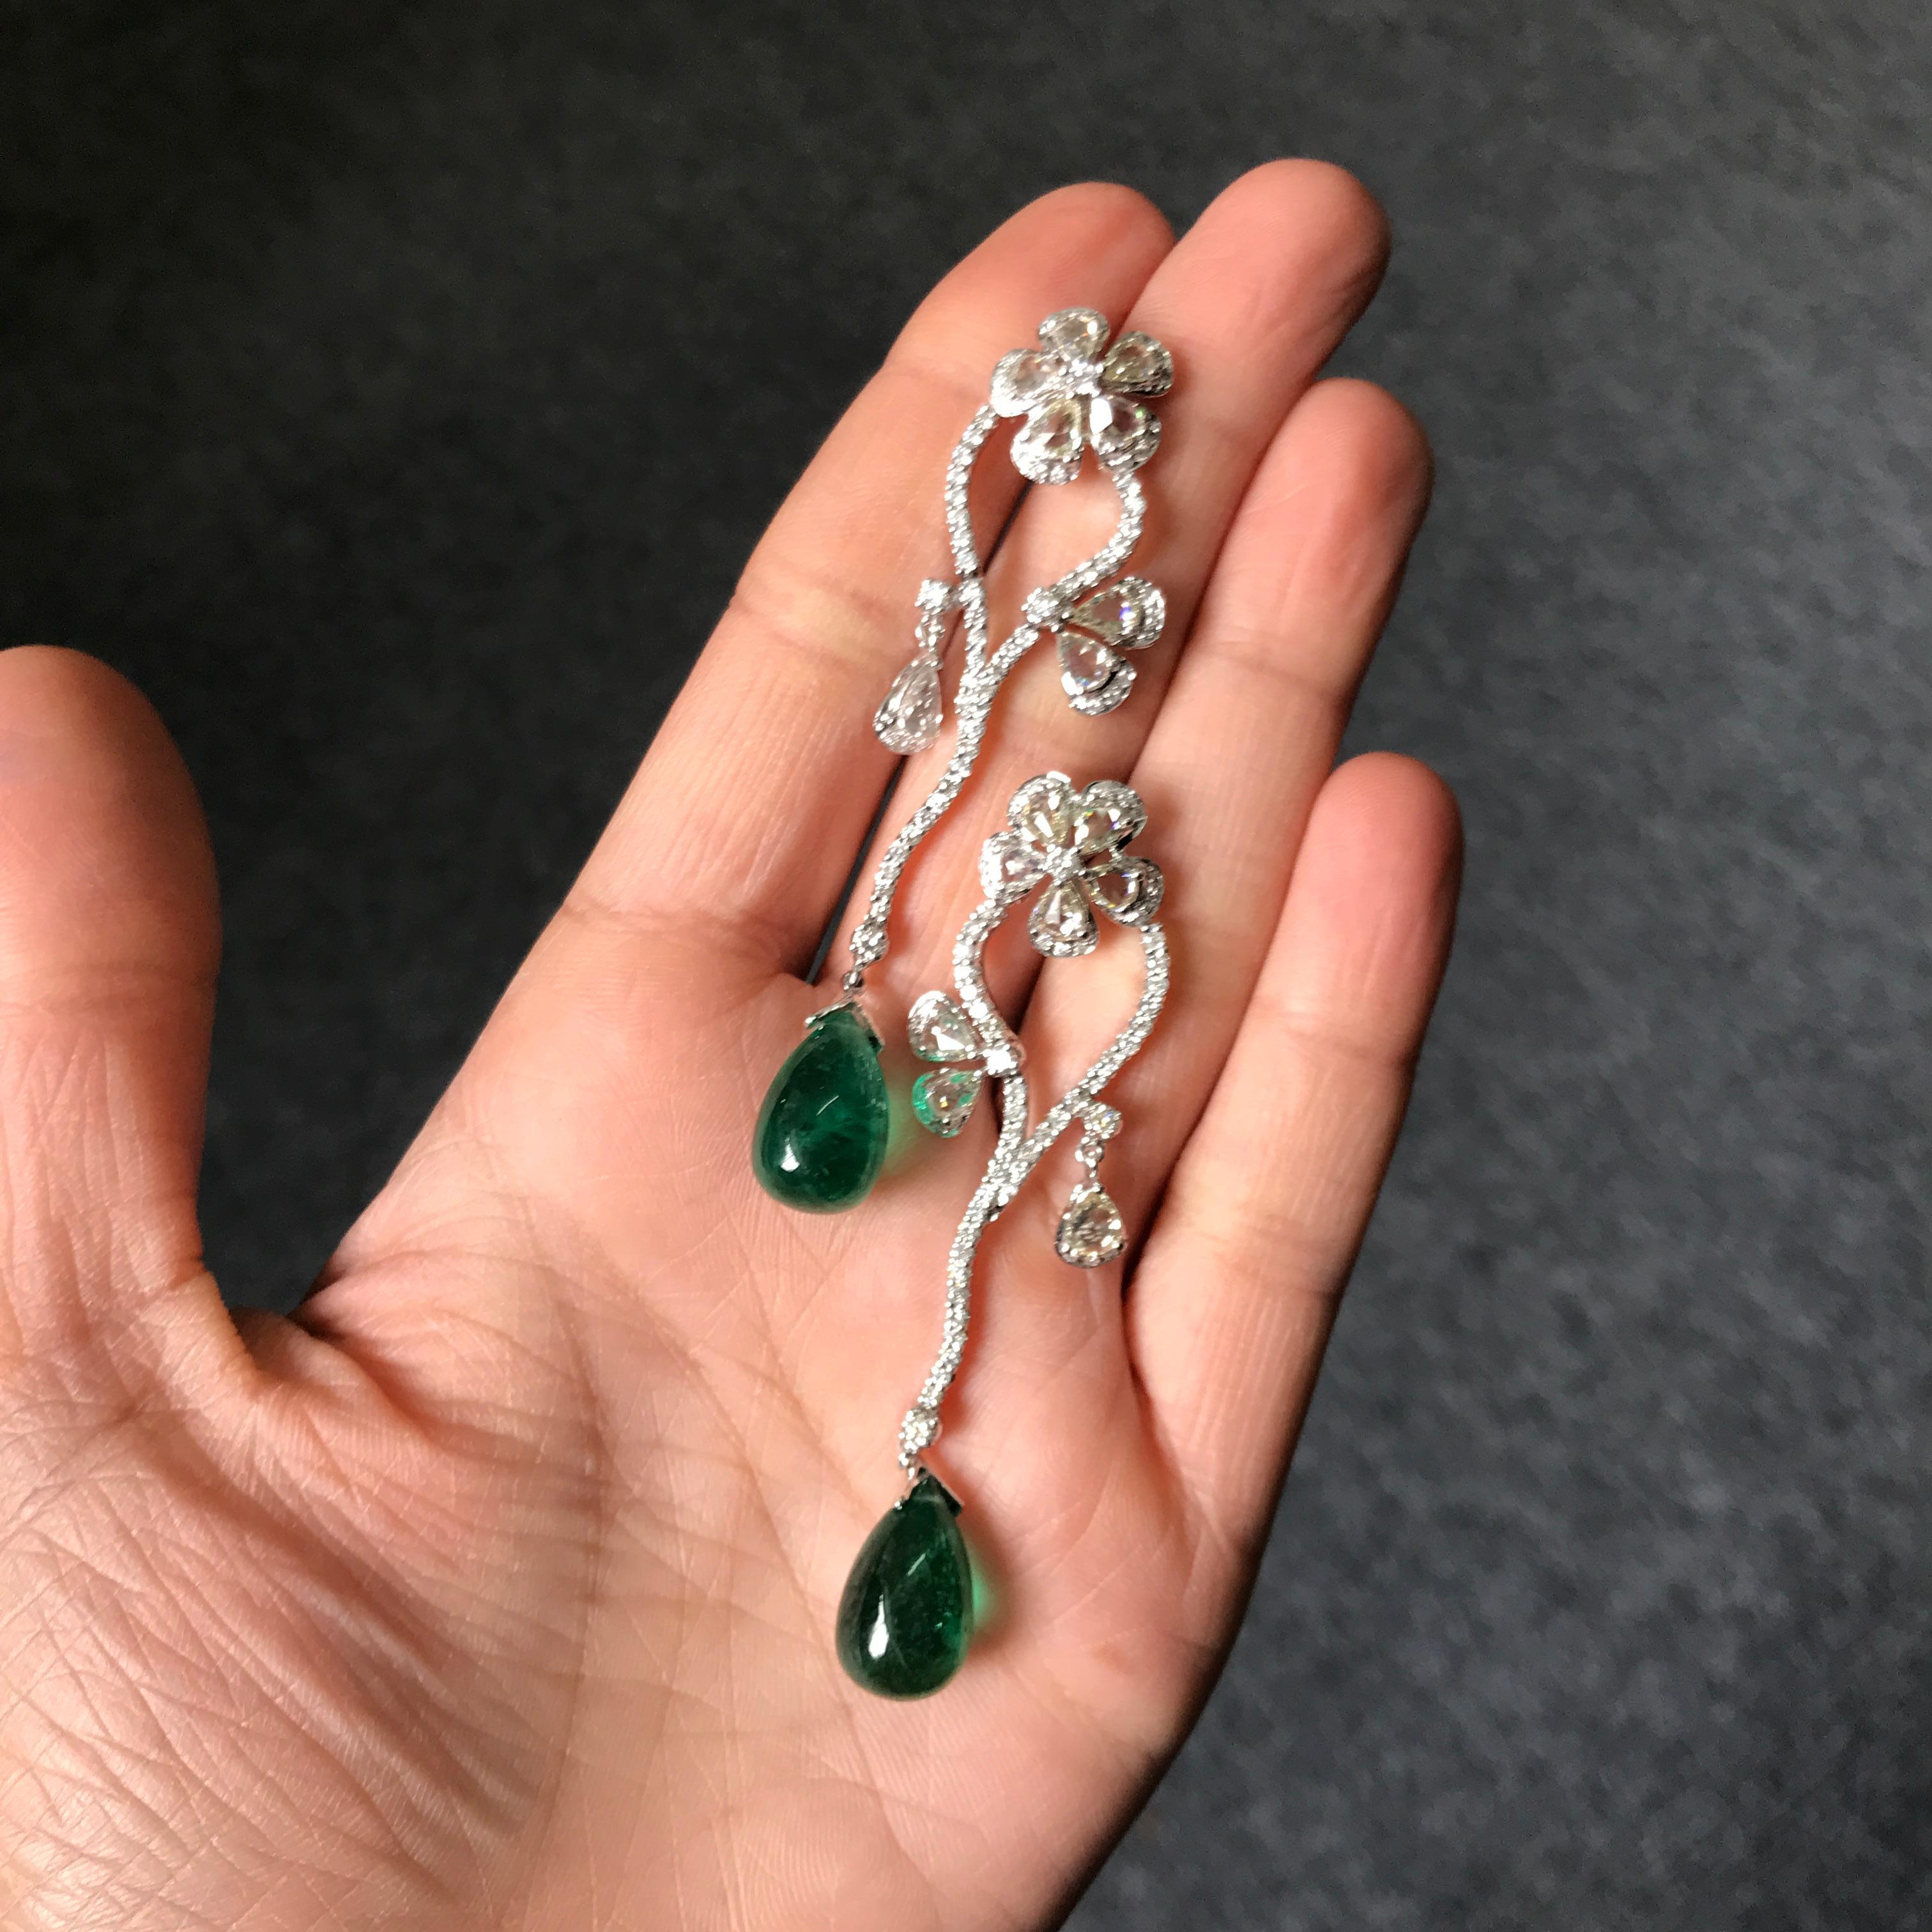 Modern 19.91 Carat Emerald Drops (Loose Stone Only)